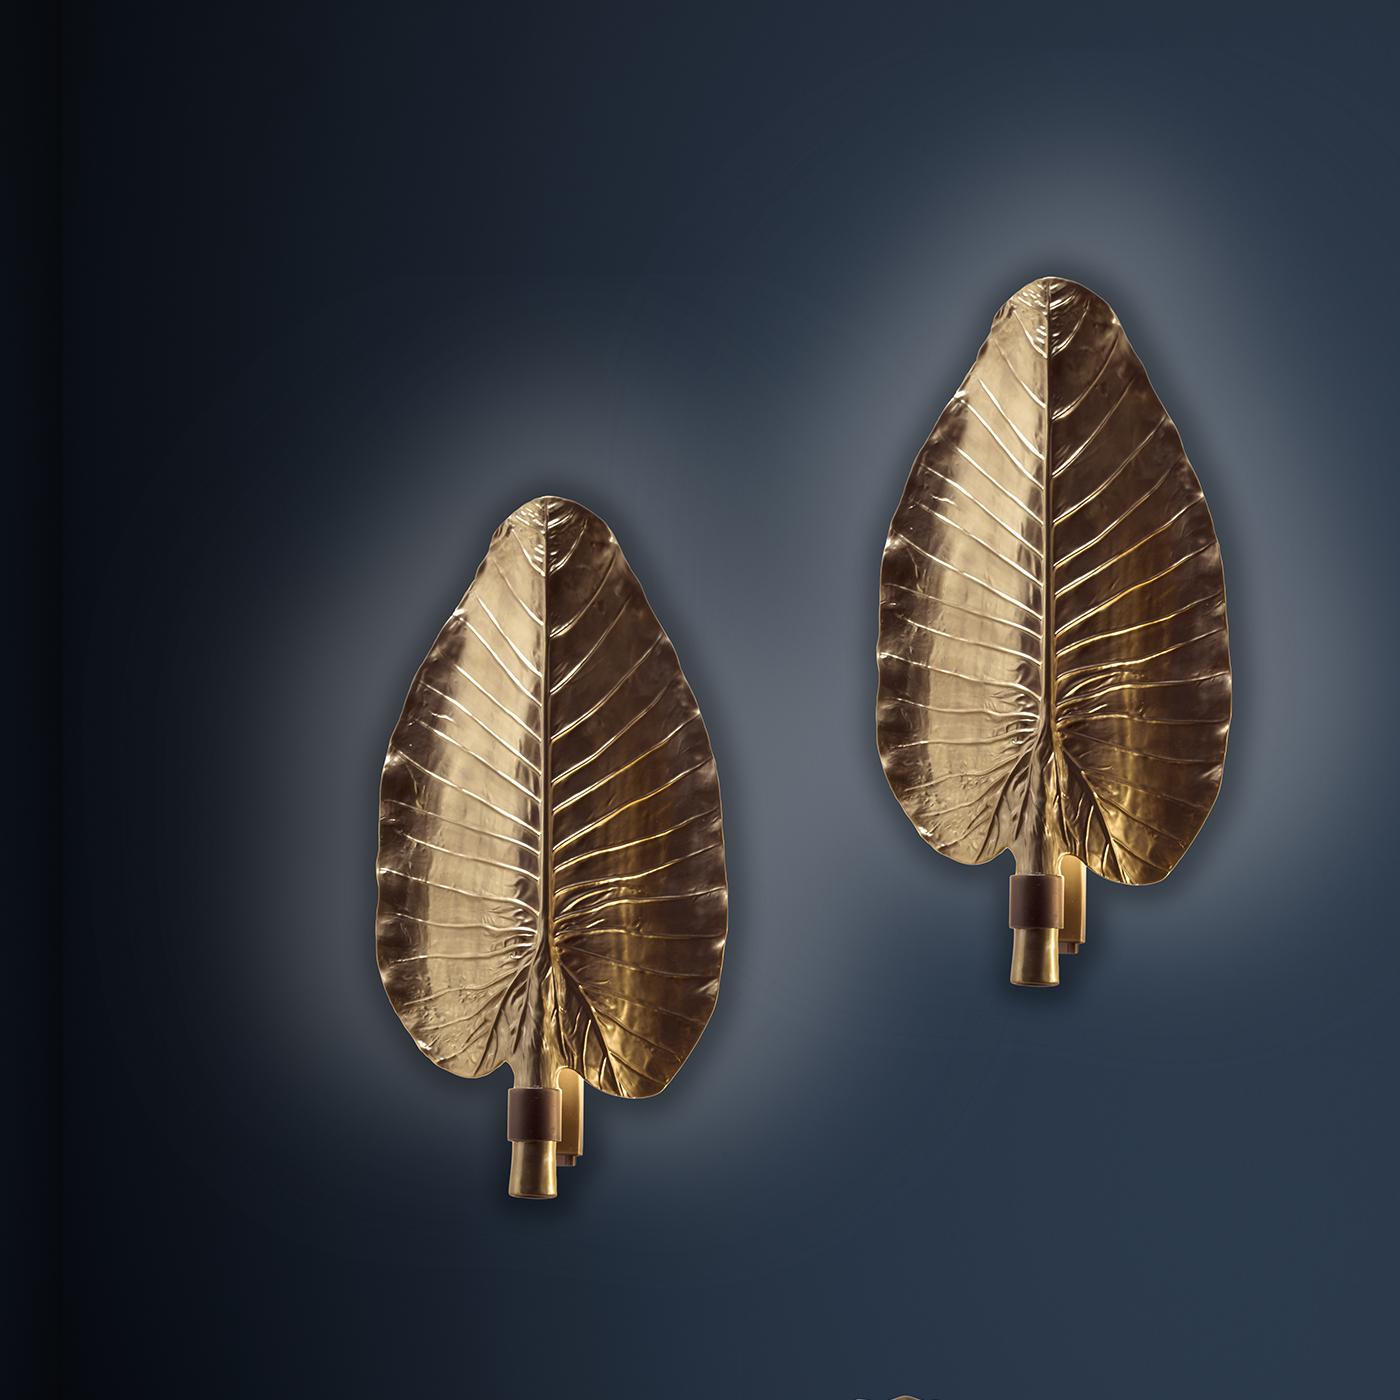 Evoking exotic landscapes and exuding a sophisticated allure, this sconce was superbly crafted of brass and porcelain to render the shape and texture of a banana leaf. The light shining inside from the single bulb reflects onto the concave